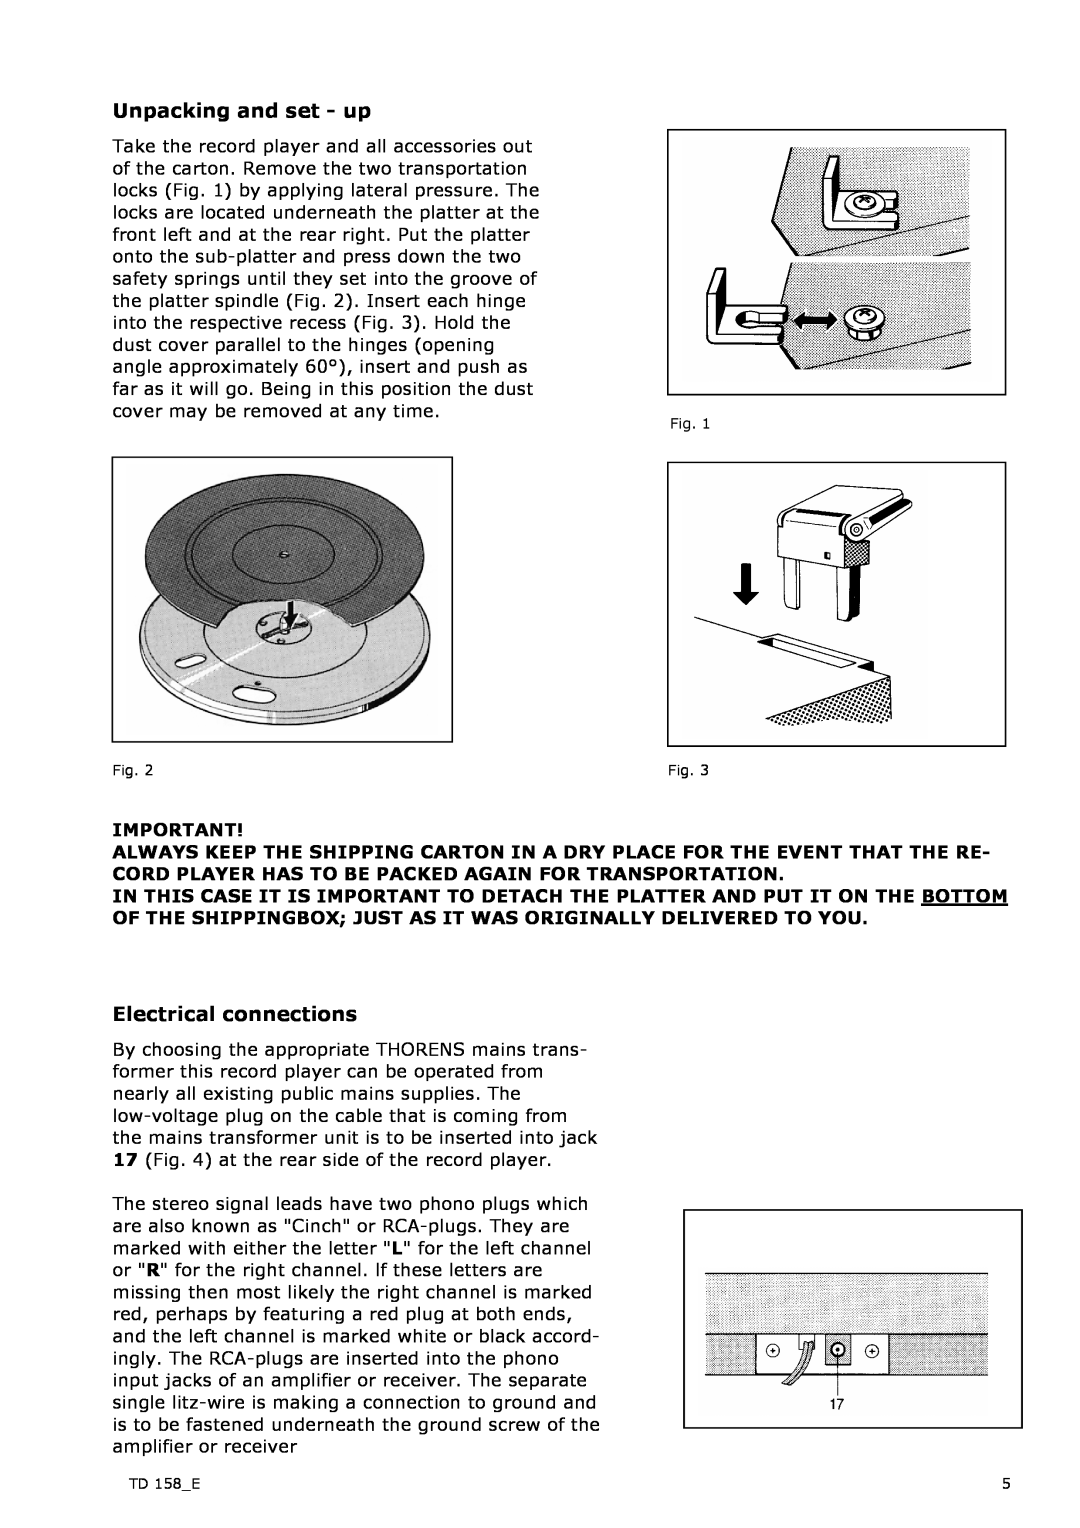 THORENS manual Unpacking and set - up, Electrical connections, TD158 E 